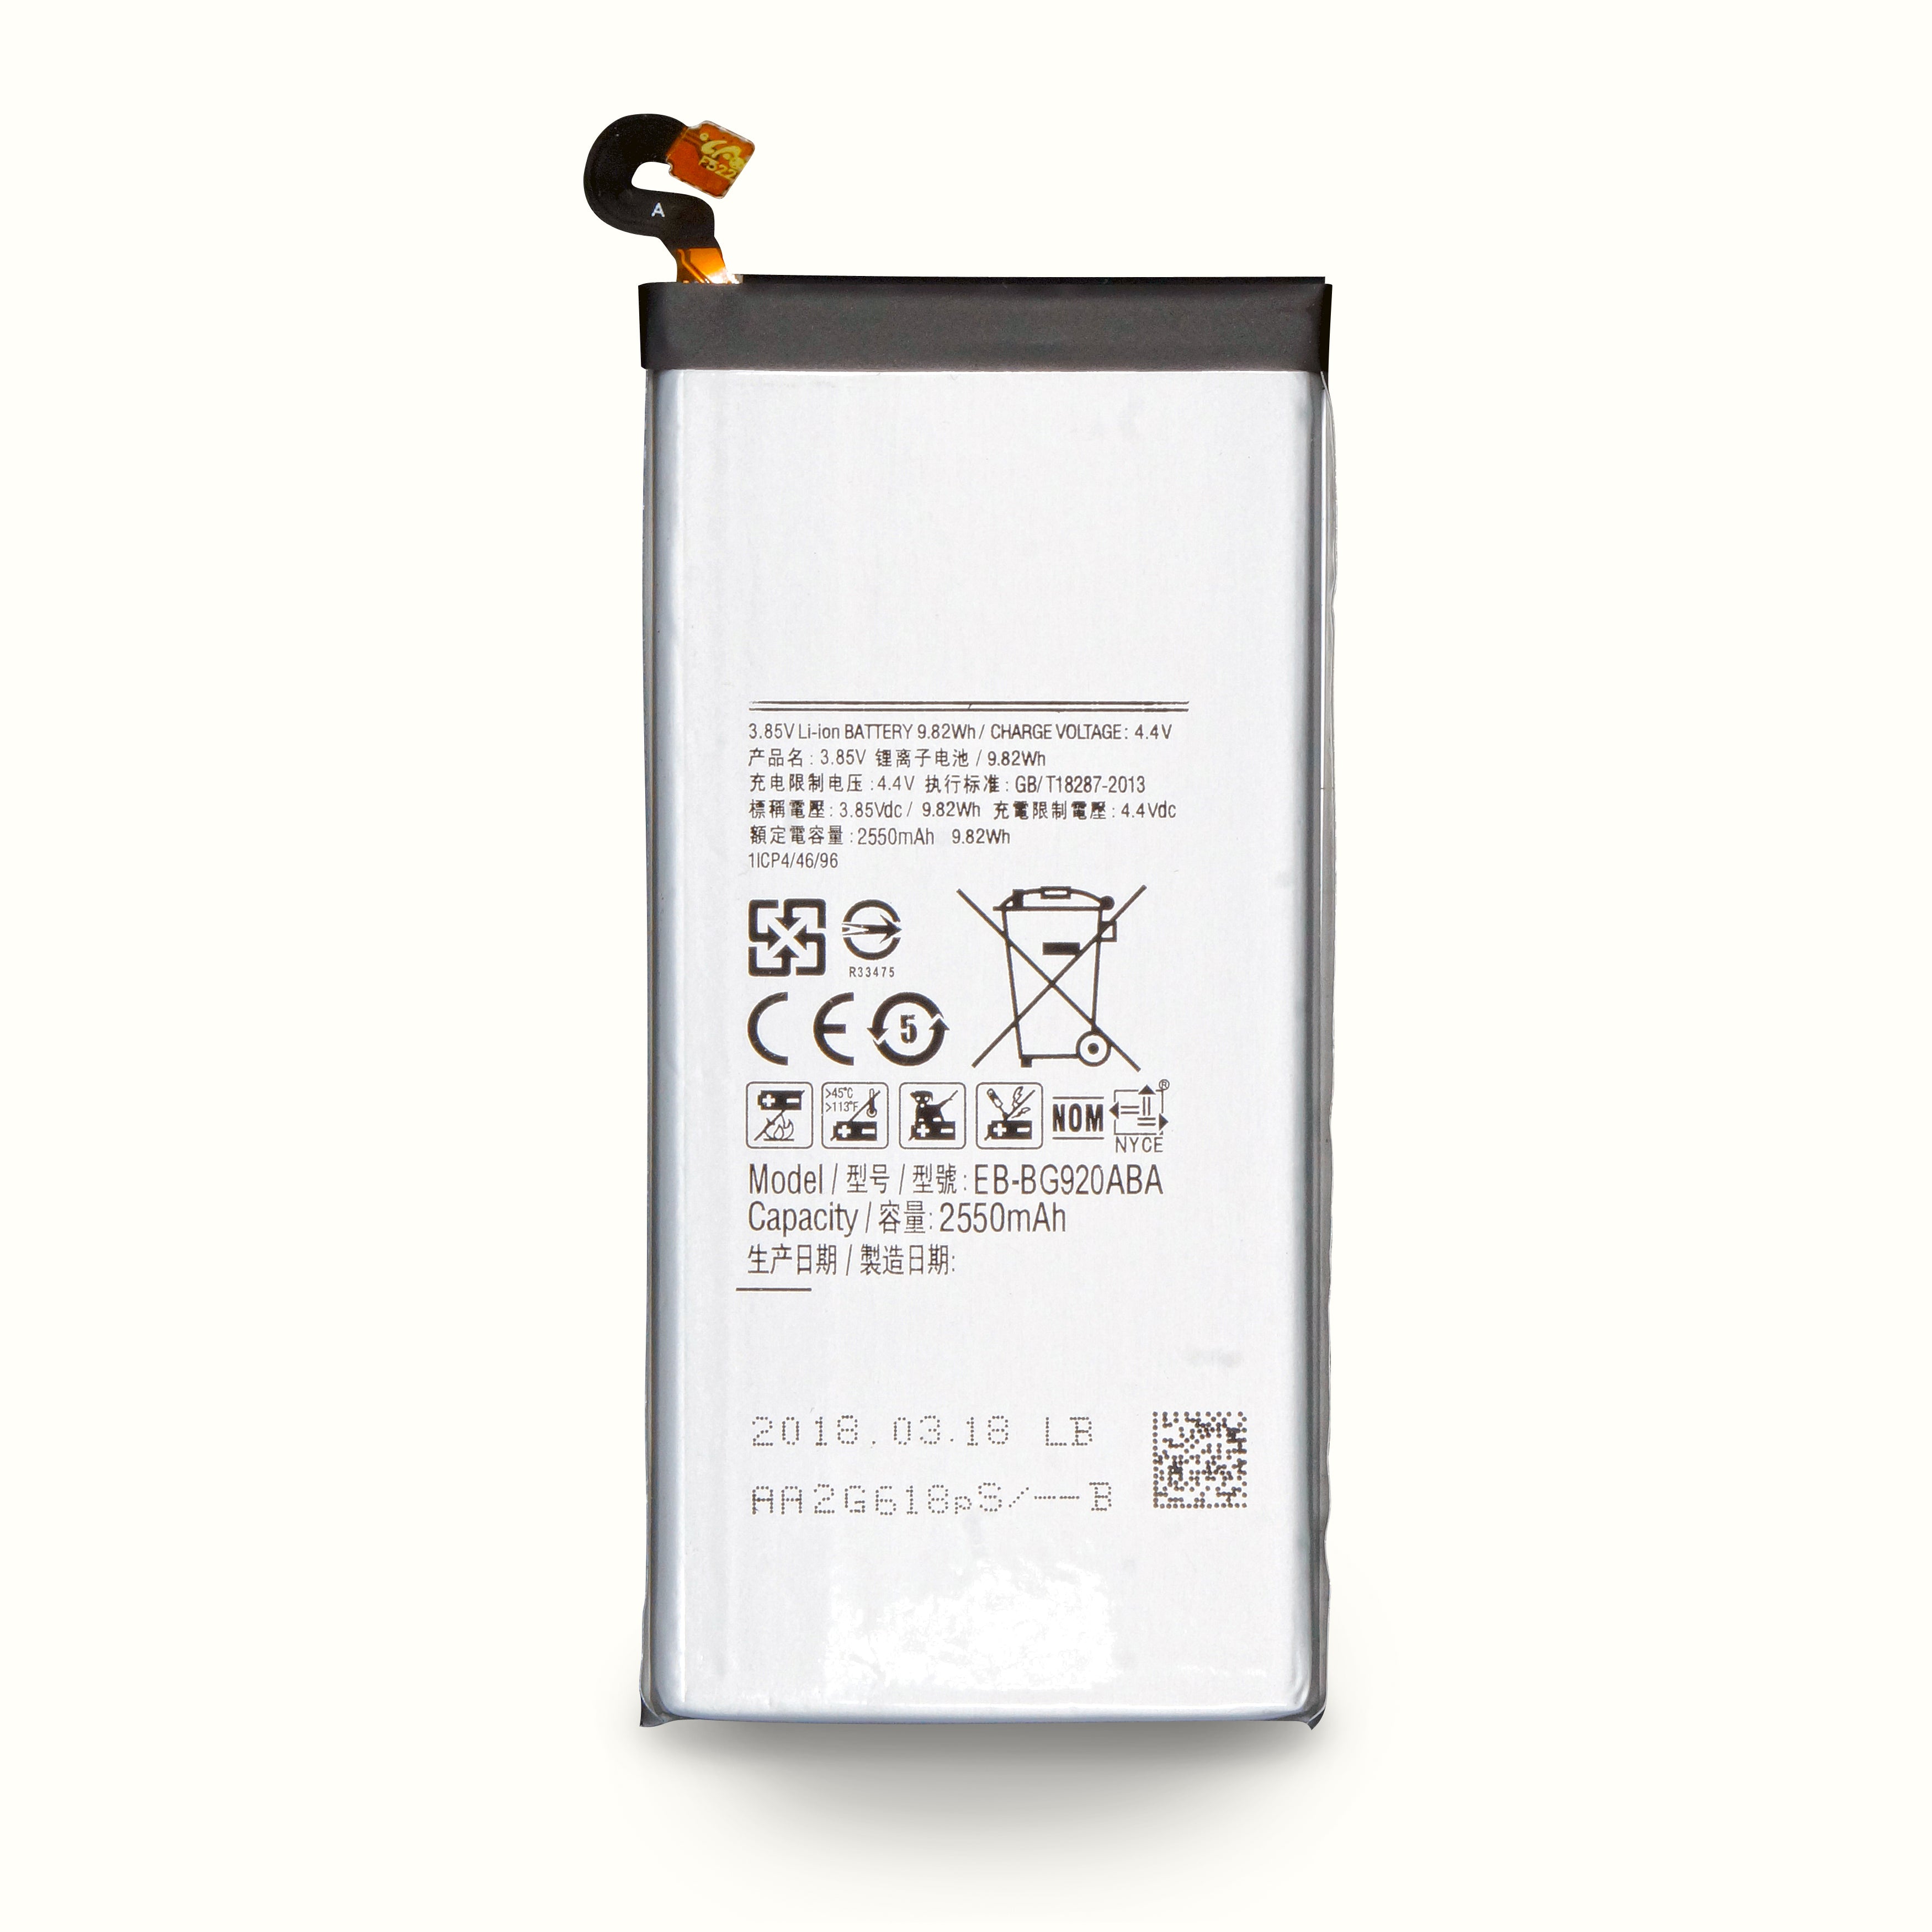 CyberTech High Capacity 2550mAh Replacement Battery for Samsung Galaxy S6